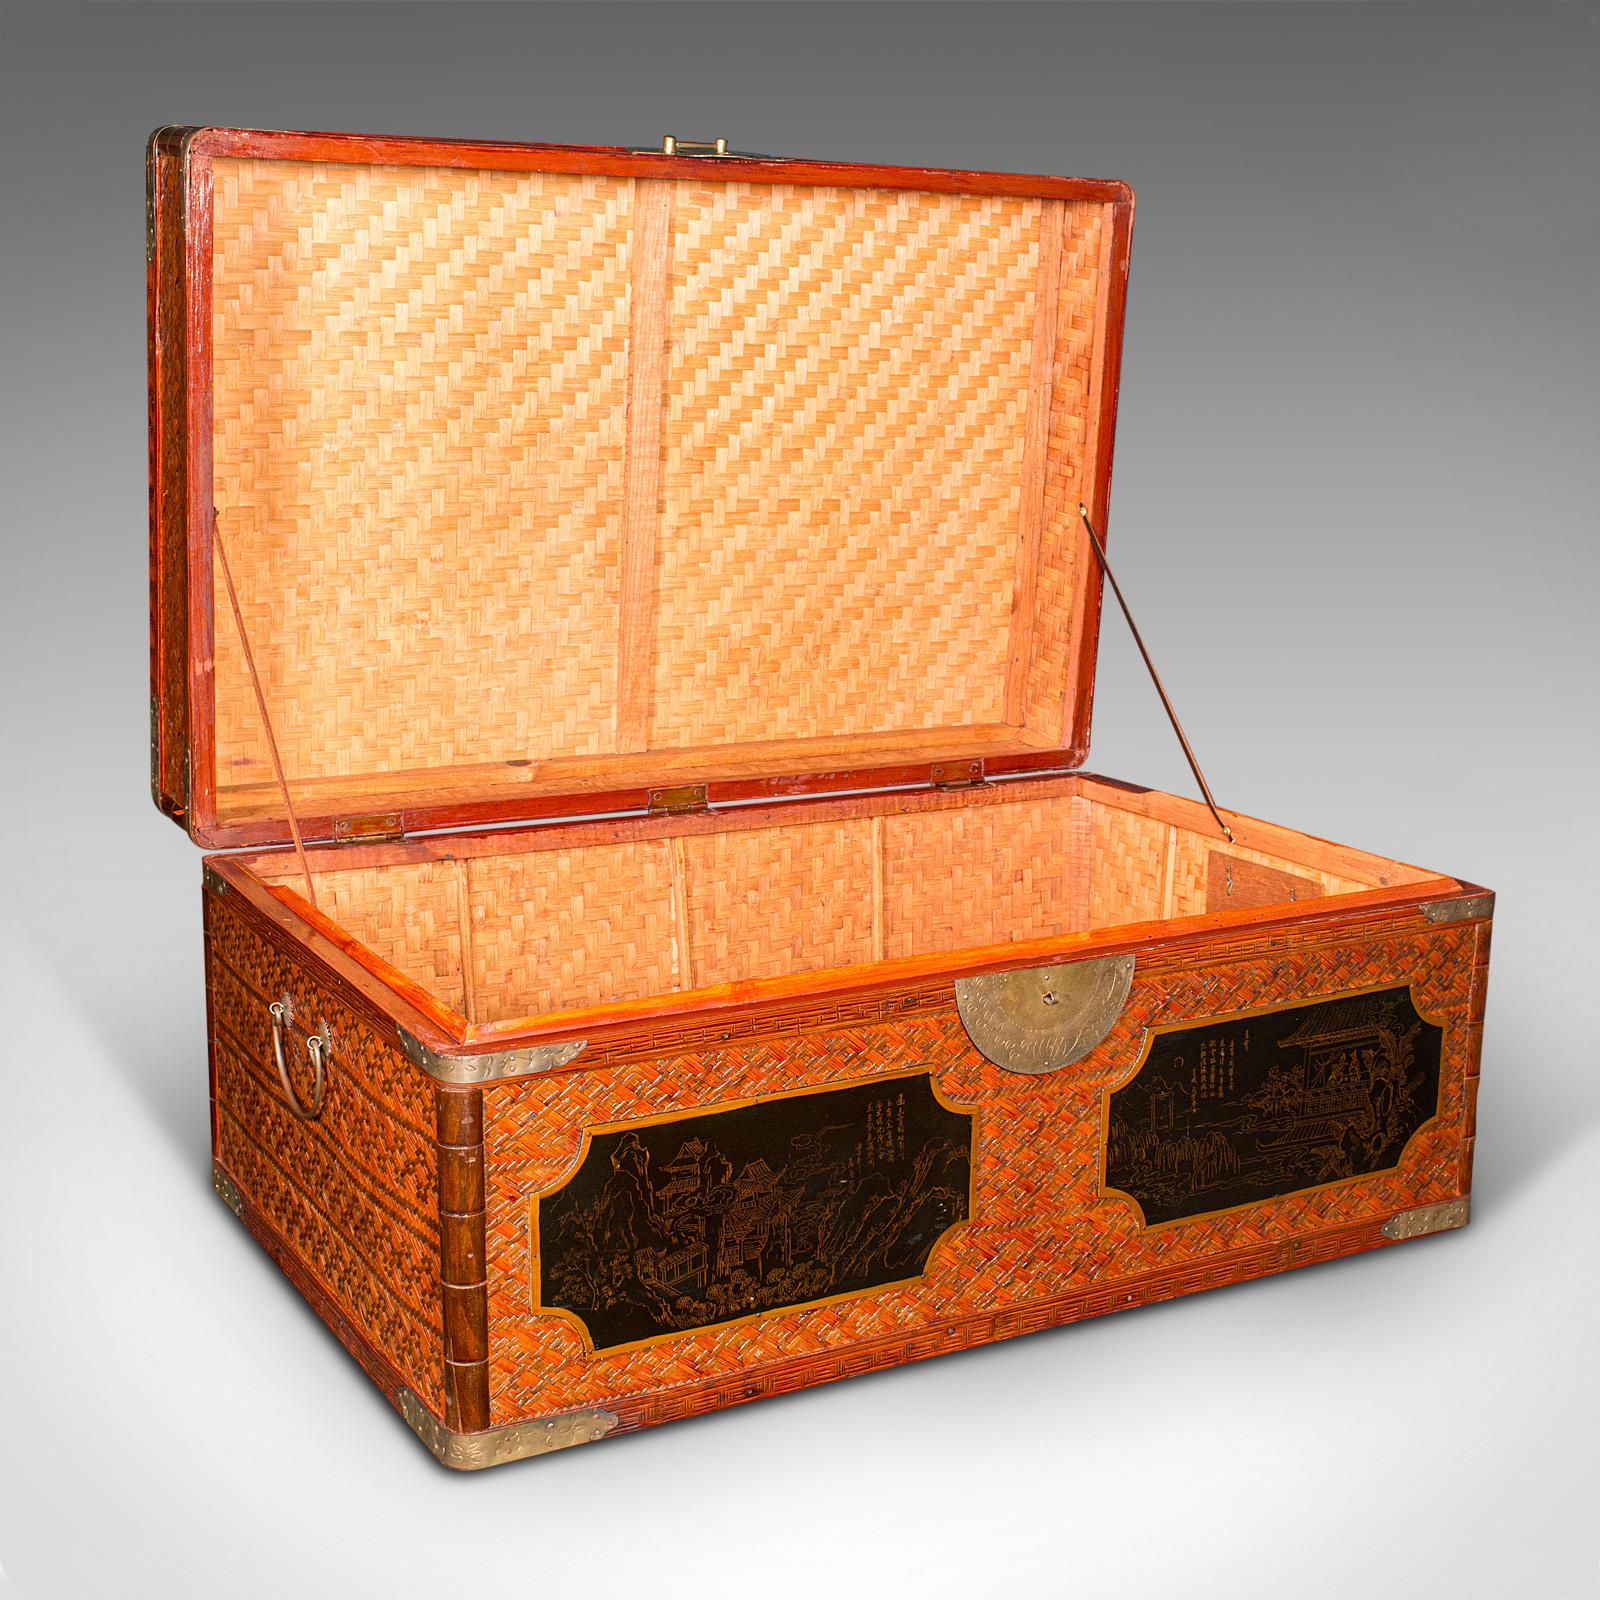 
This is a vintage kimono chest. A Japanese, woven reed campaign linen trunk, dating to the late Art Deco period, circa 1950.

Fascinating example, with fine traditional detail
Displays a desirable aged patina and in good original order
Tightly